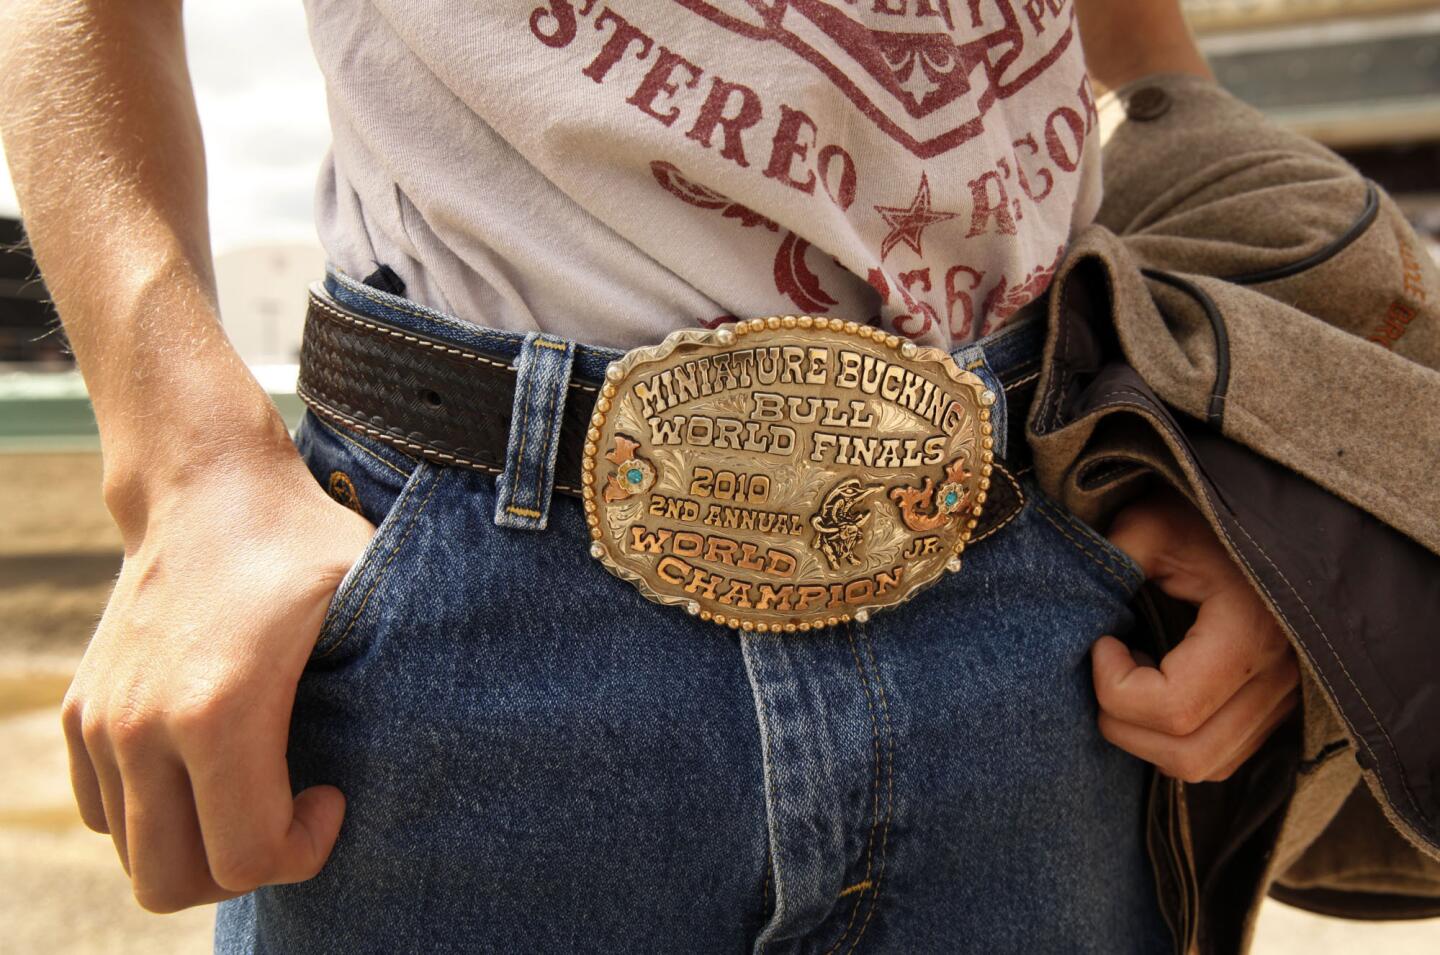 Some of the world's largest belt buckles are found in western Canada. Specifically Alberta. Most specifically at the Calgary Stampede, where specimens like this are handed out to winning rodeo competitors. This buckle belonged to a 13-year-old cowboy.